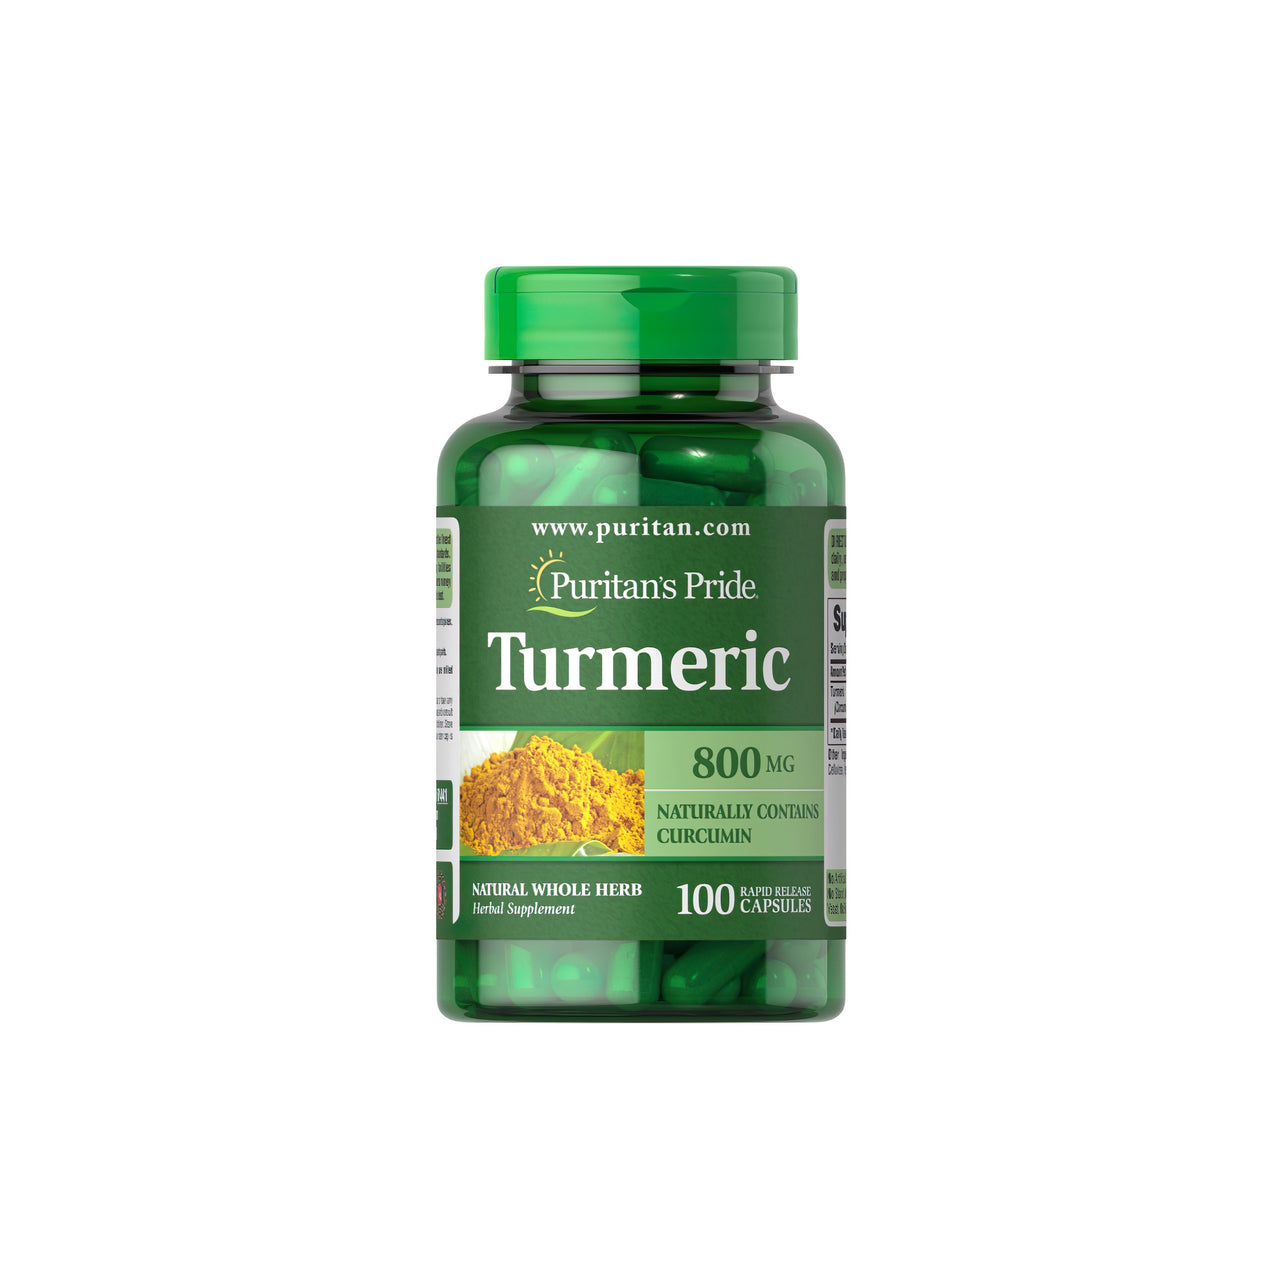 A bottle of Puritan's Pride Turmeric 800 mg 100 caps providing antioxidant support for joint health.